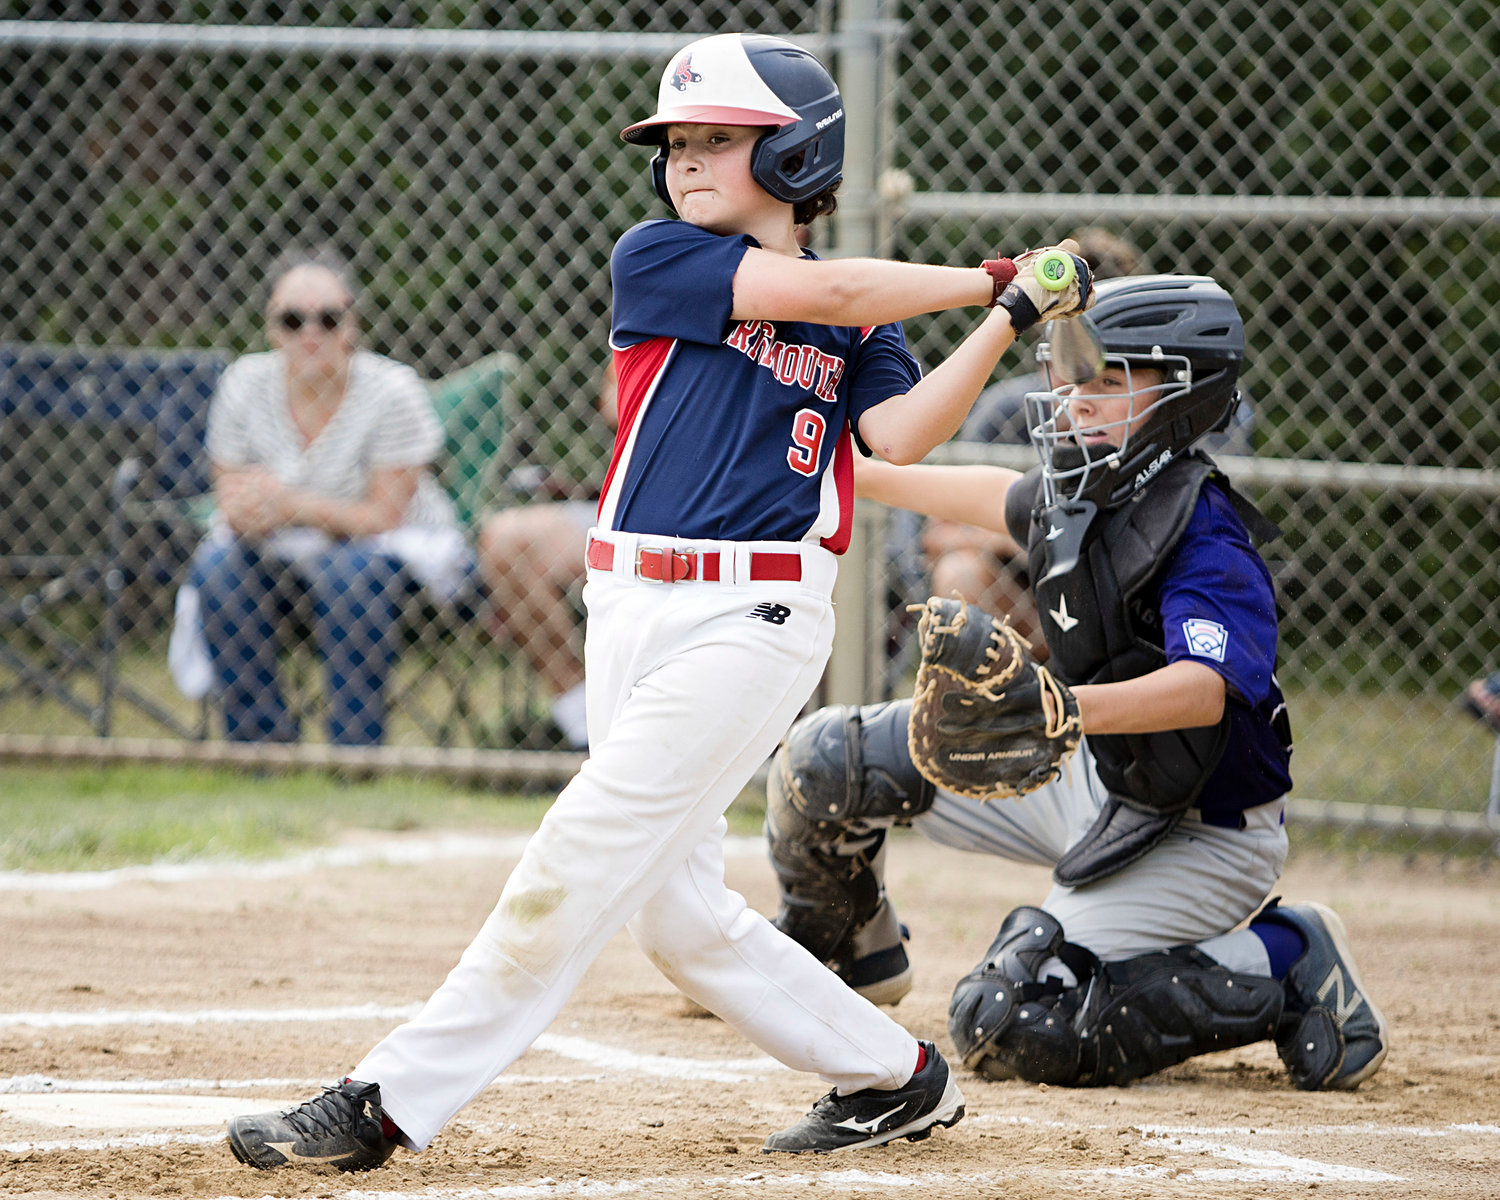 Carter Doran follows through with a swing while at bat against Bristol/Warren in the District 2 Major All-Star finals, Saturday.